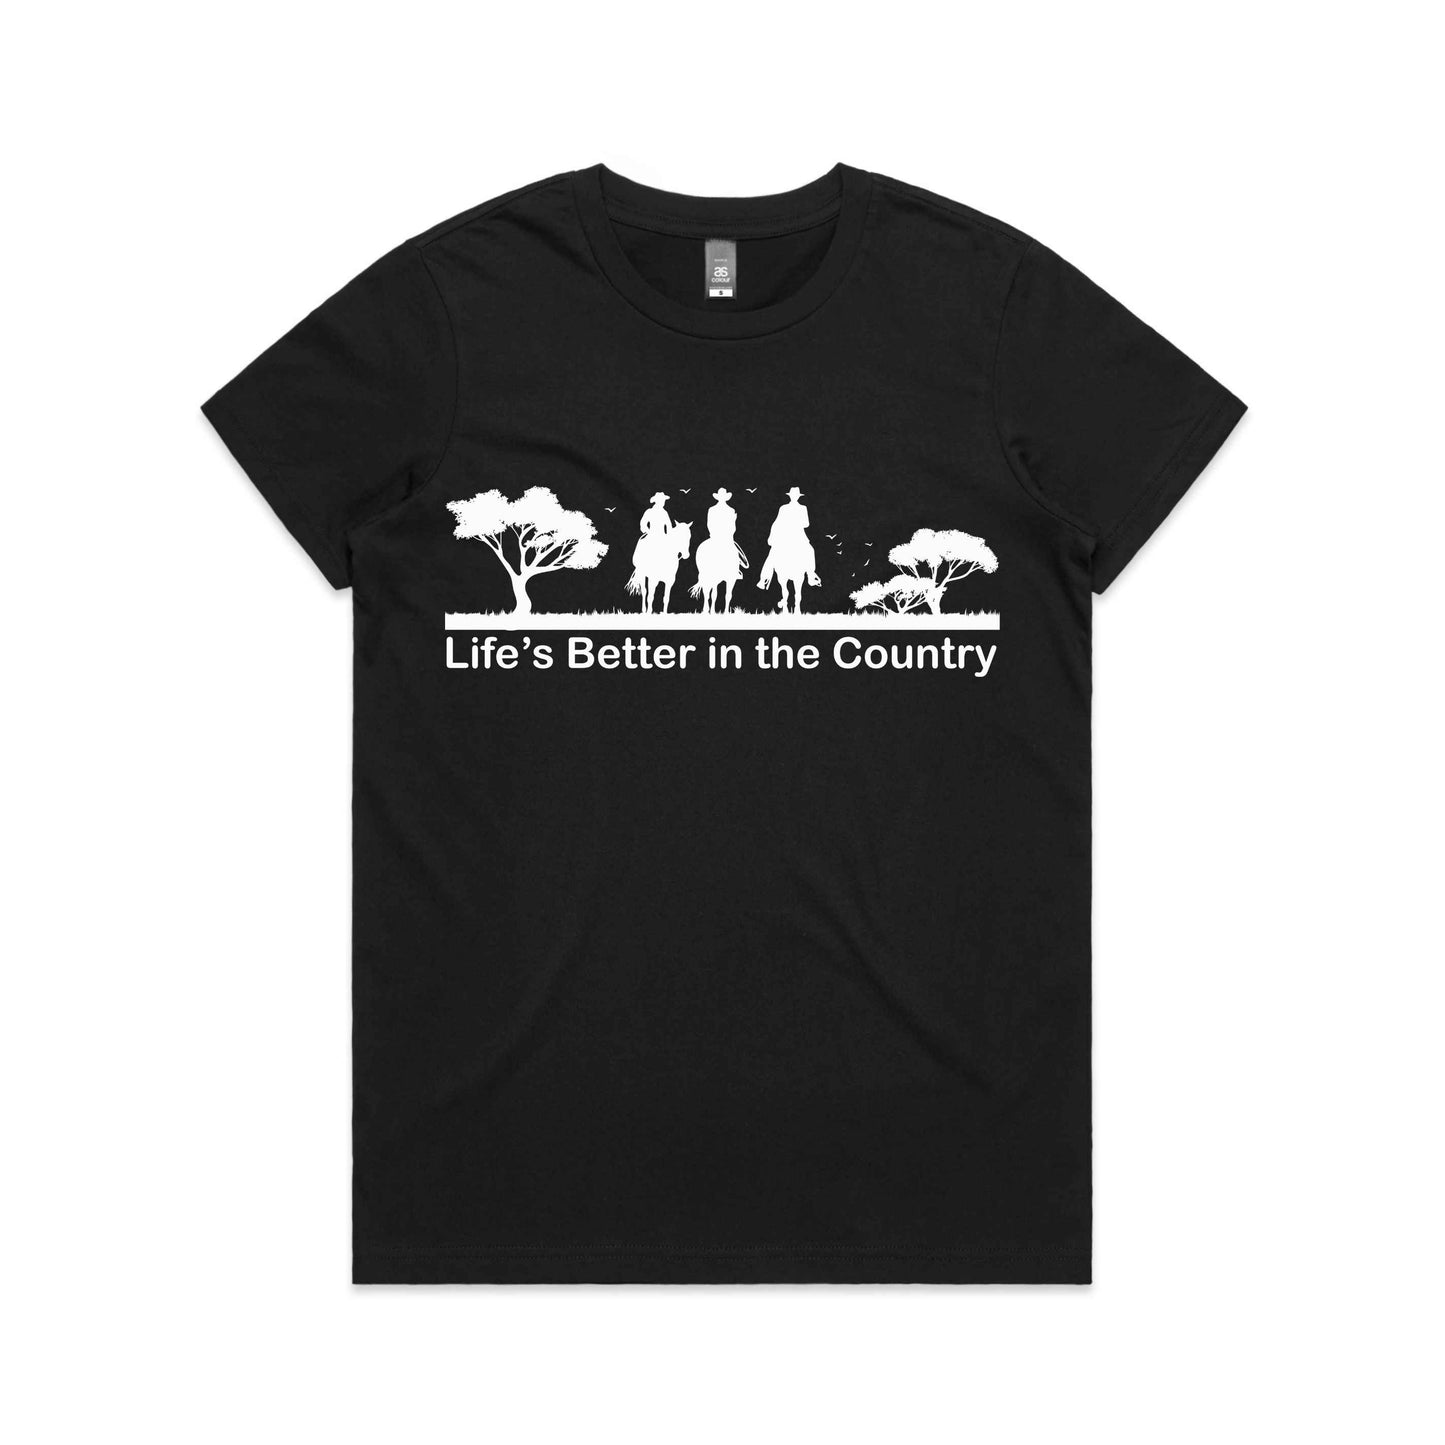 Hayco Women's Life's Better in the Country